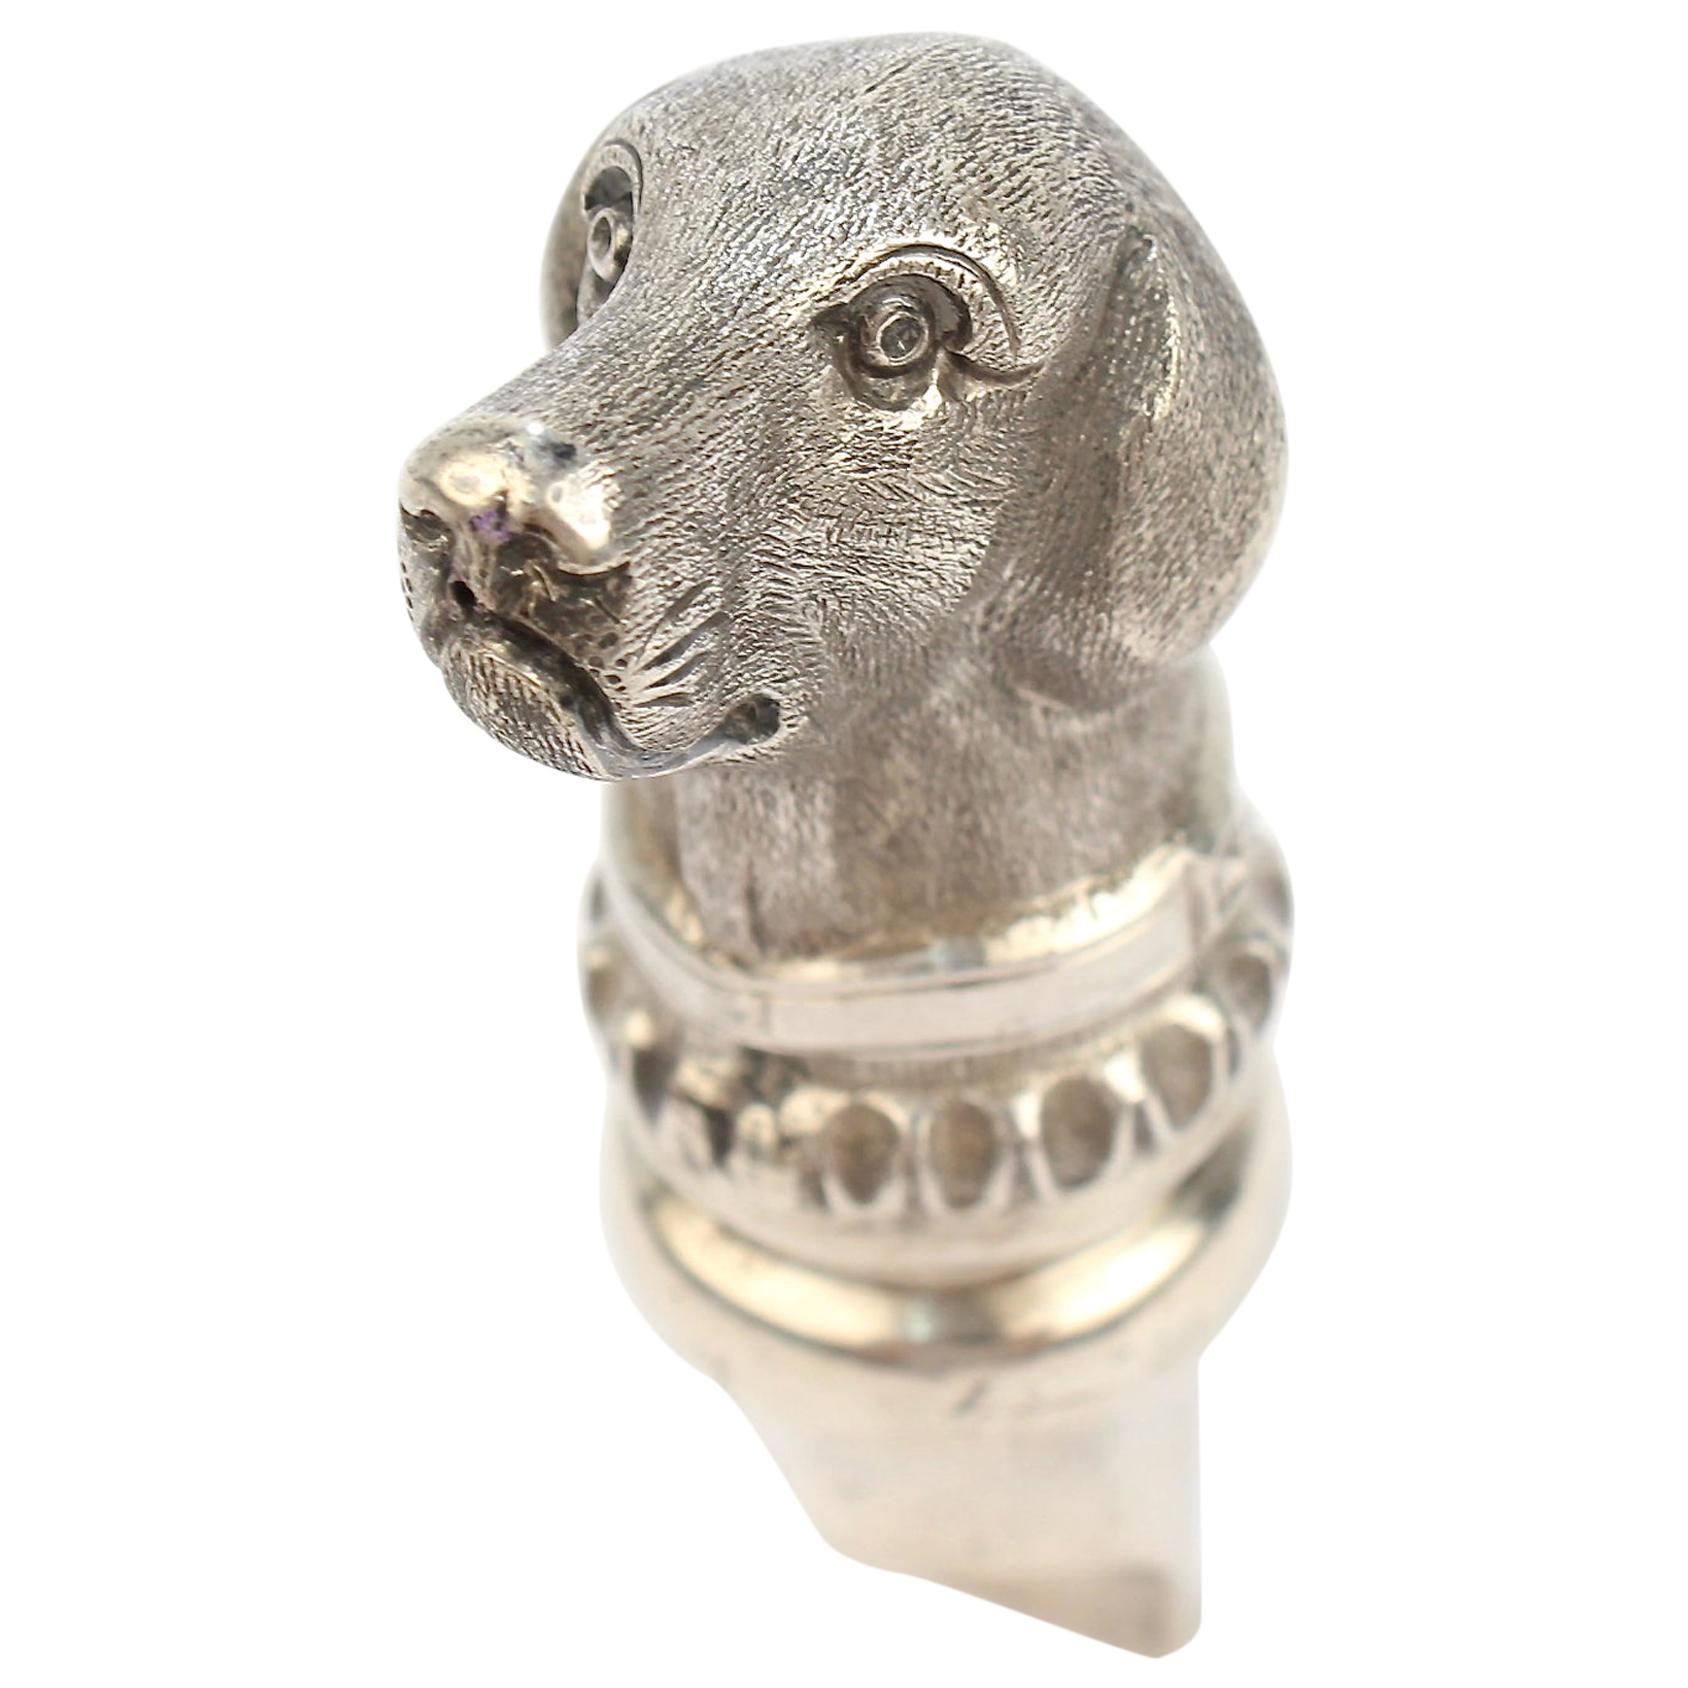 Antique Figural Sterling Silver Dog Whistle from the Mario Buatta Collection